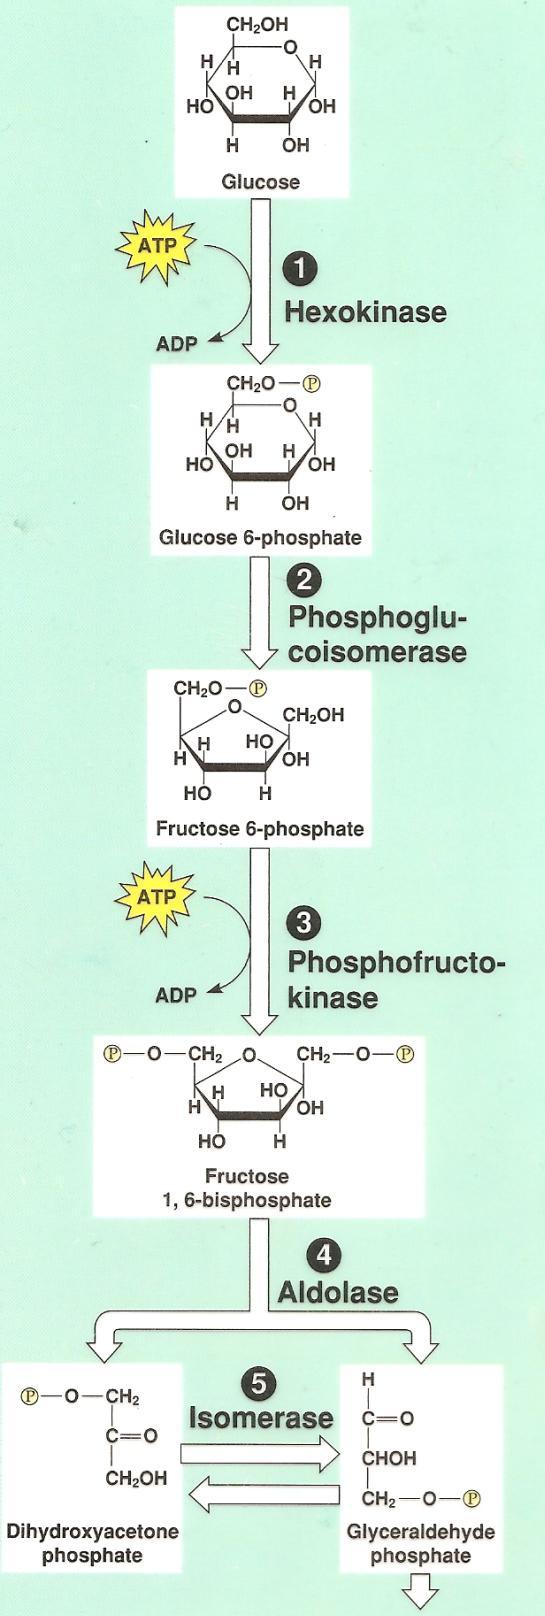 Q: Do you think glycolysis can still work?